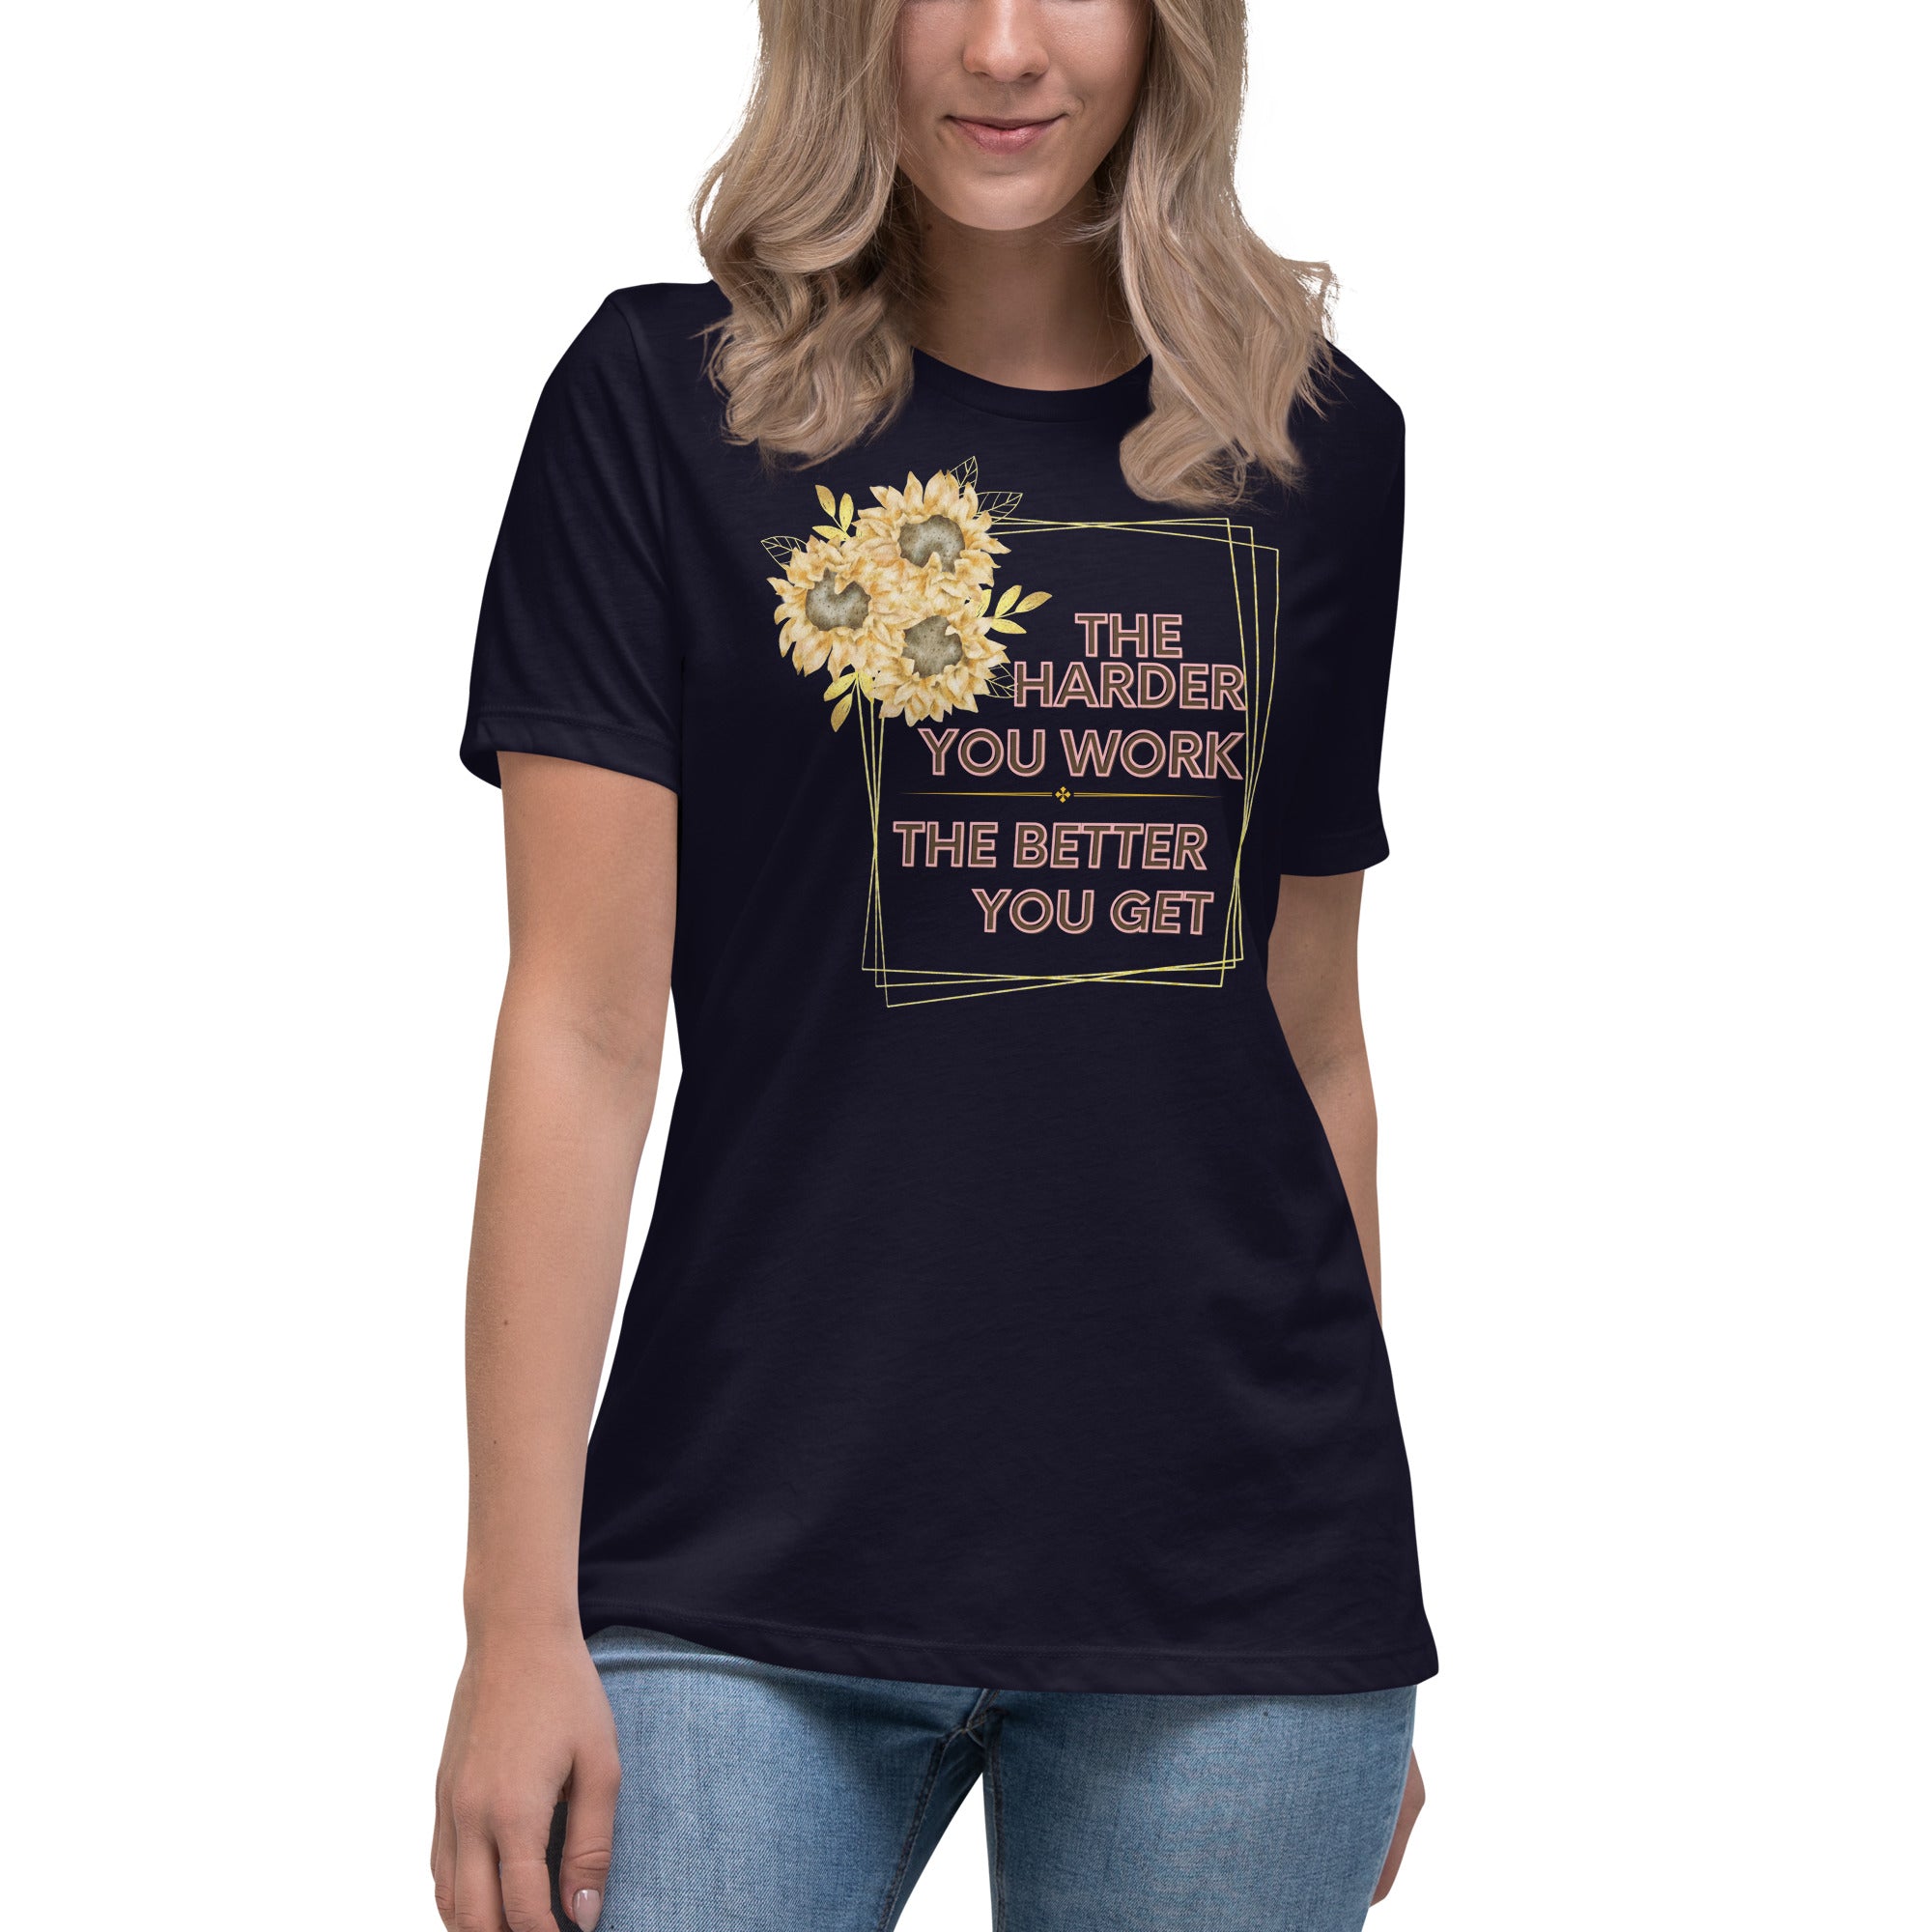 The Harder You Work The Better You Get Women's Relaxed T-Shirt